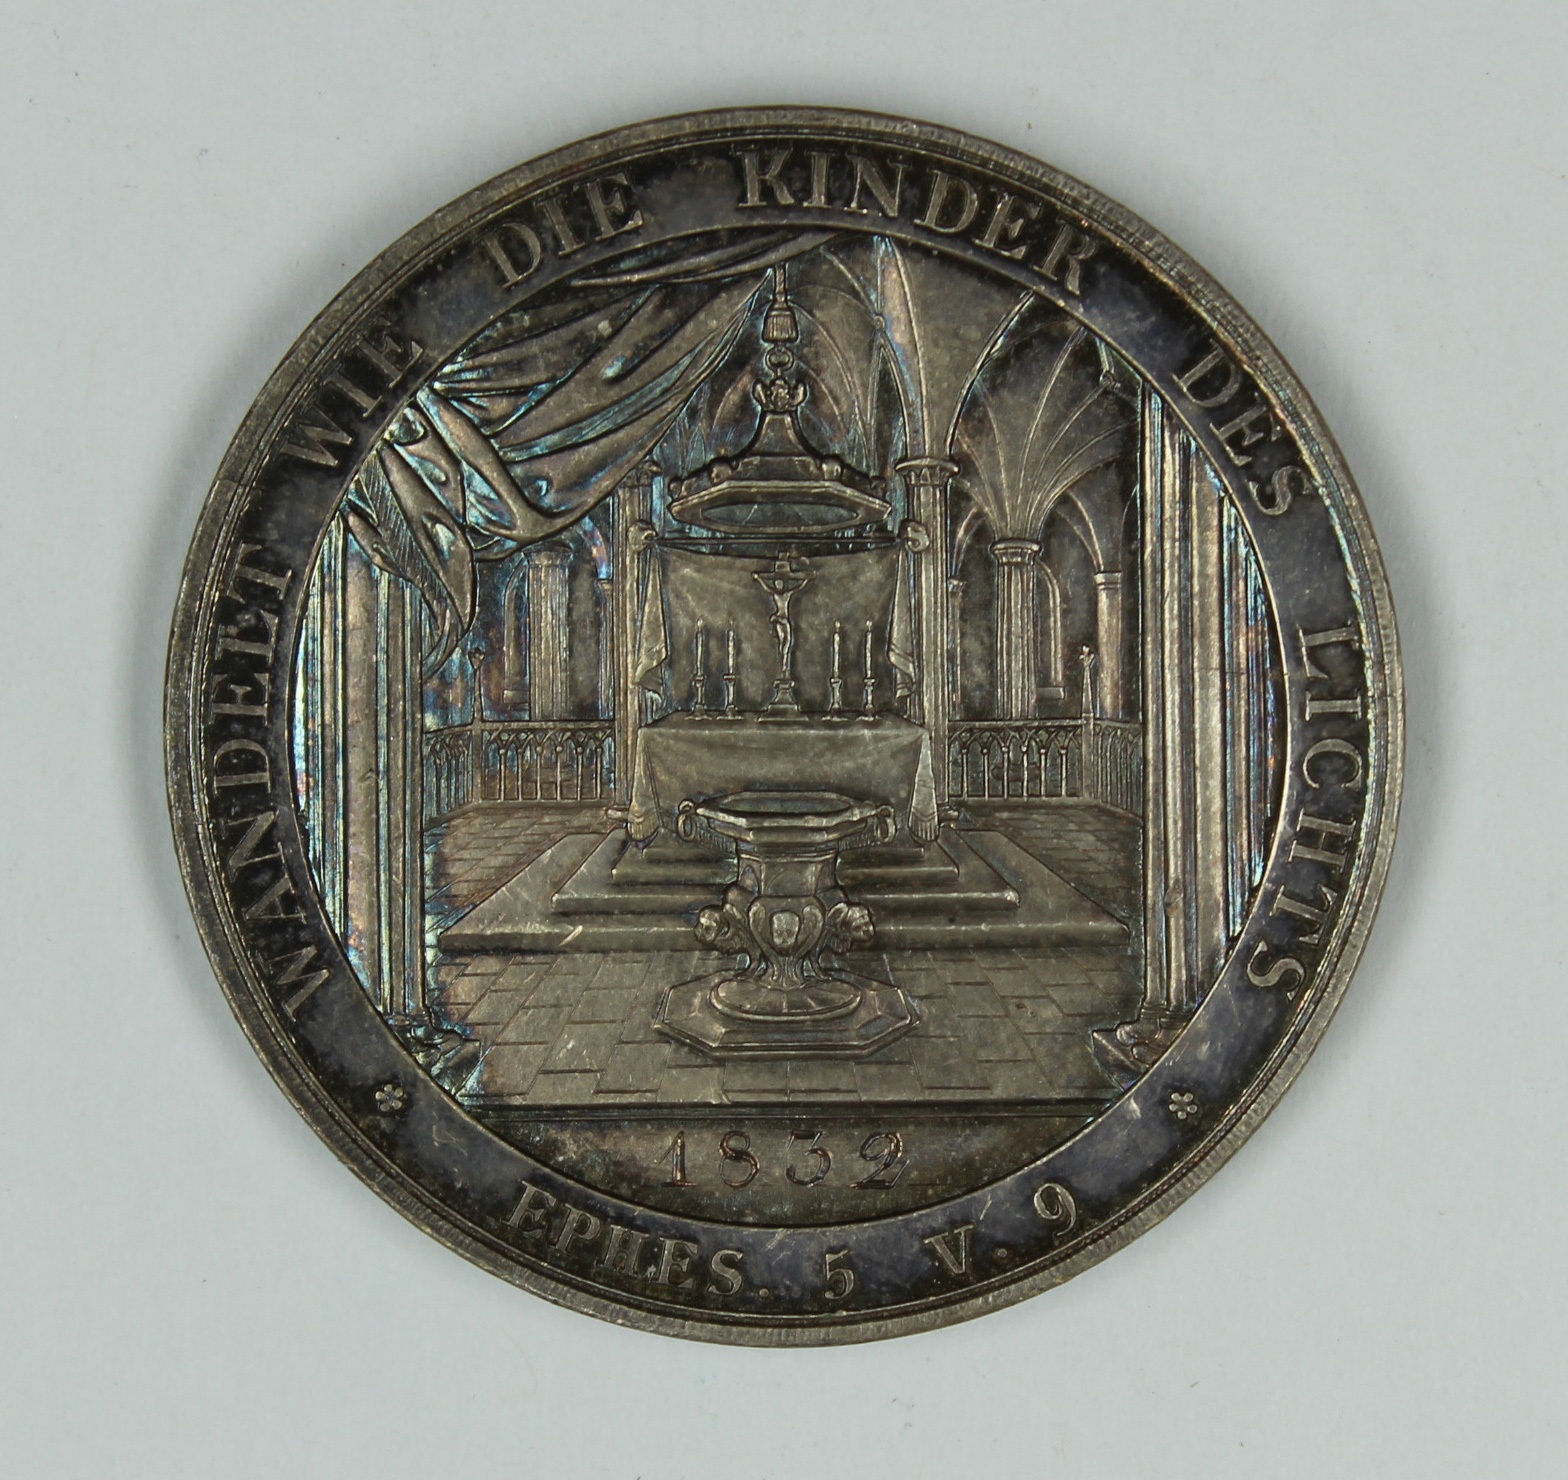 Taufmedaille, 1832 (Museum Wolmirstedt RR-F)